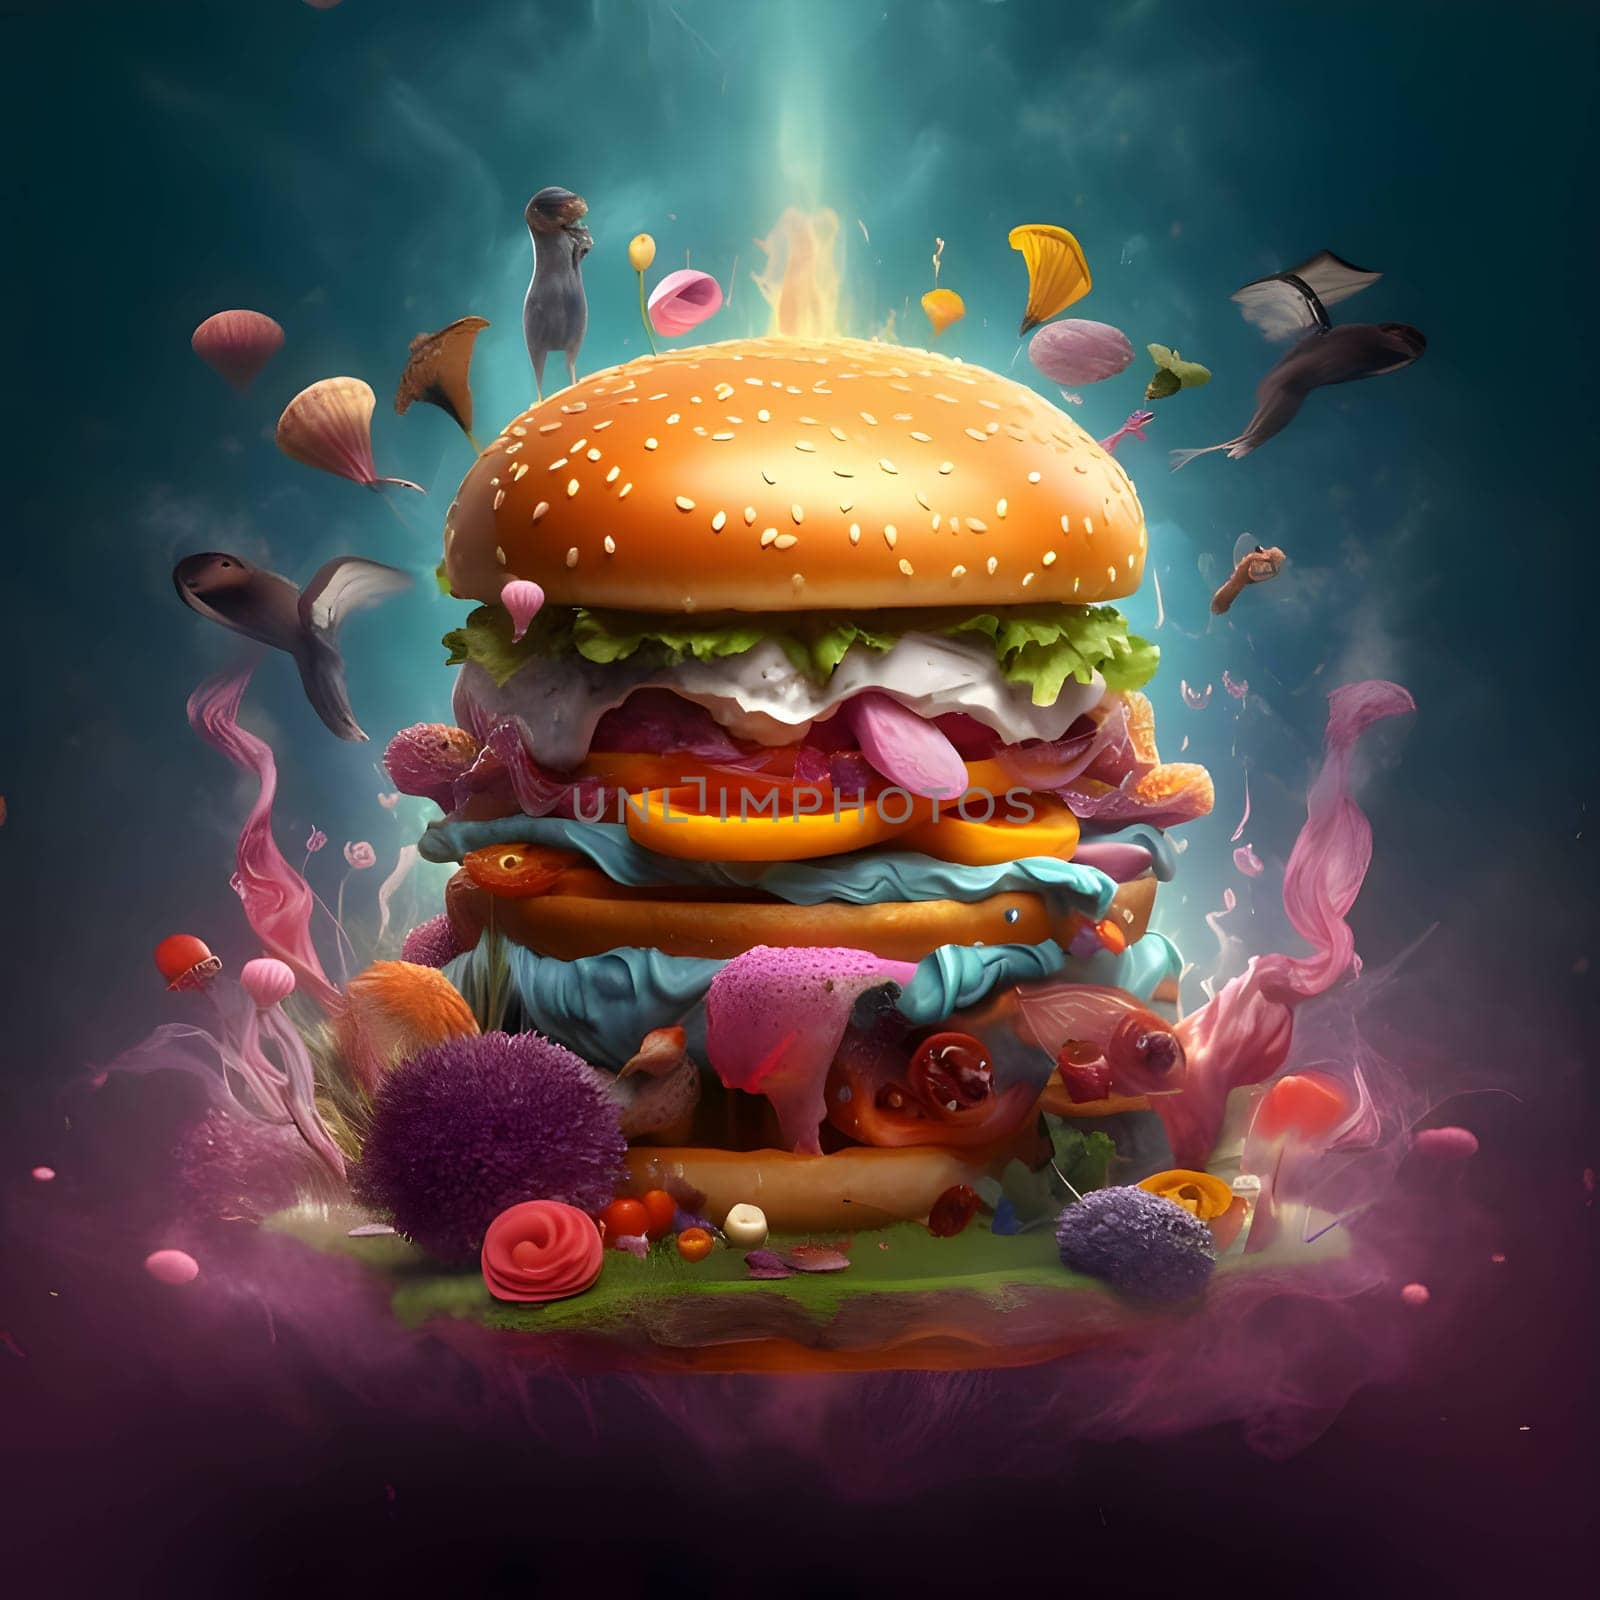 Abstract illustration of a water-inspired hamburger arrangement. Dynamic patterns and fluid forms depict the burger components, creating a unique visual experience.